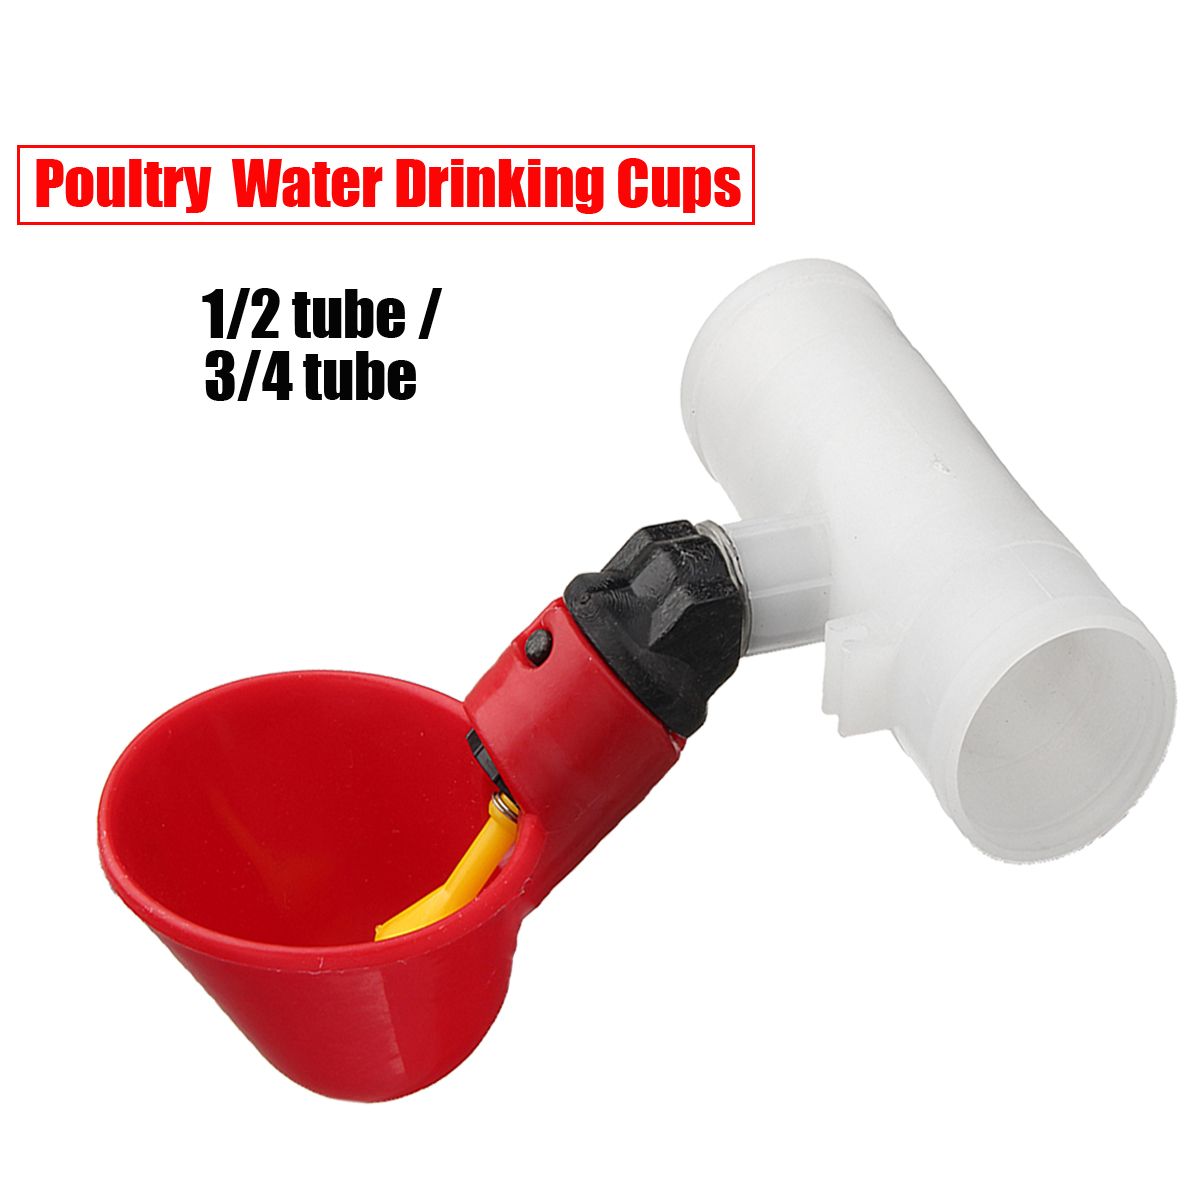 12--34-Poultry-Water-Drinking-Cups-Chicken-Hen-Adjustable-Automatic-Drinker-Drinks-Holder-1279916